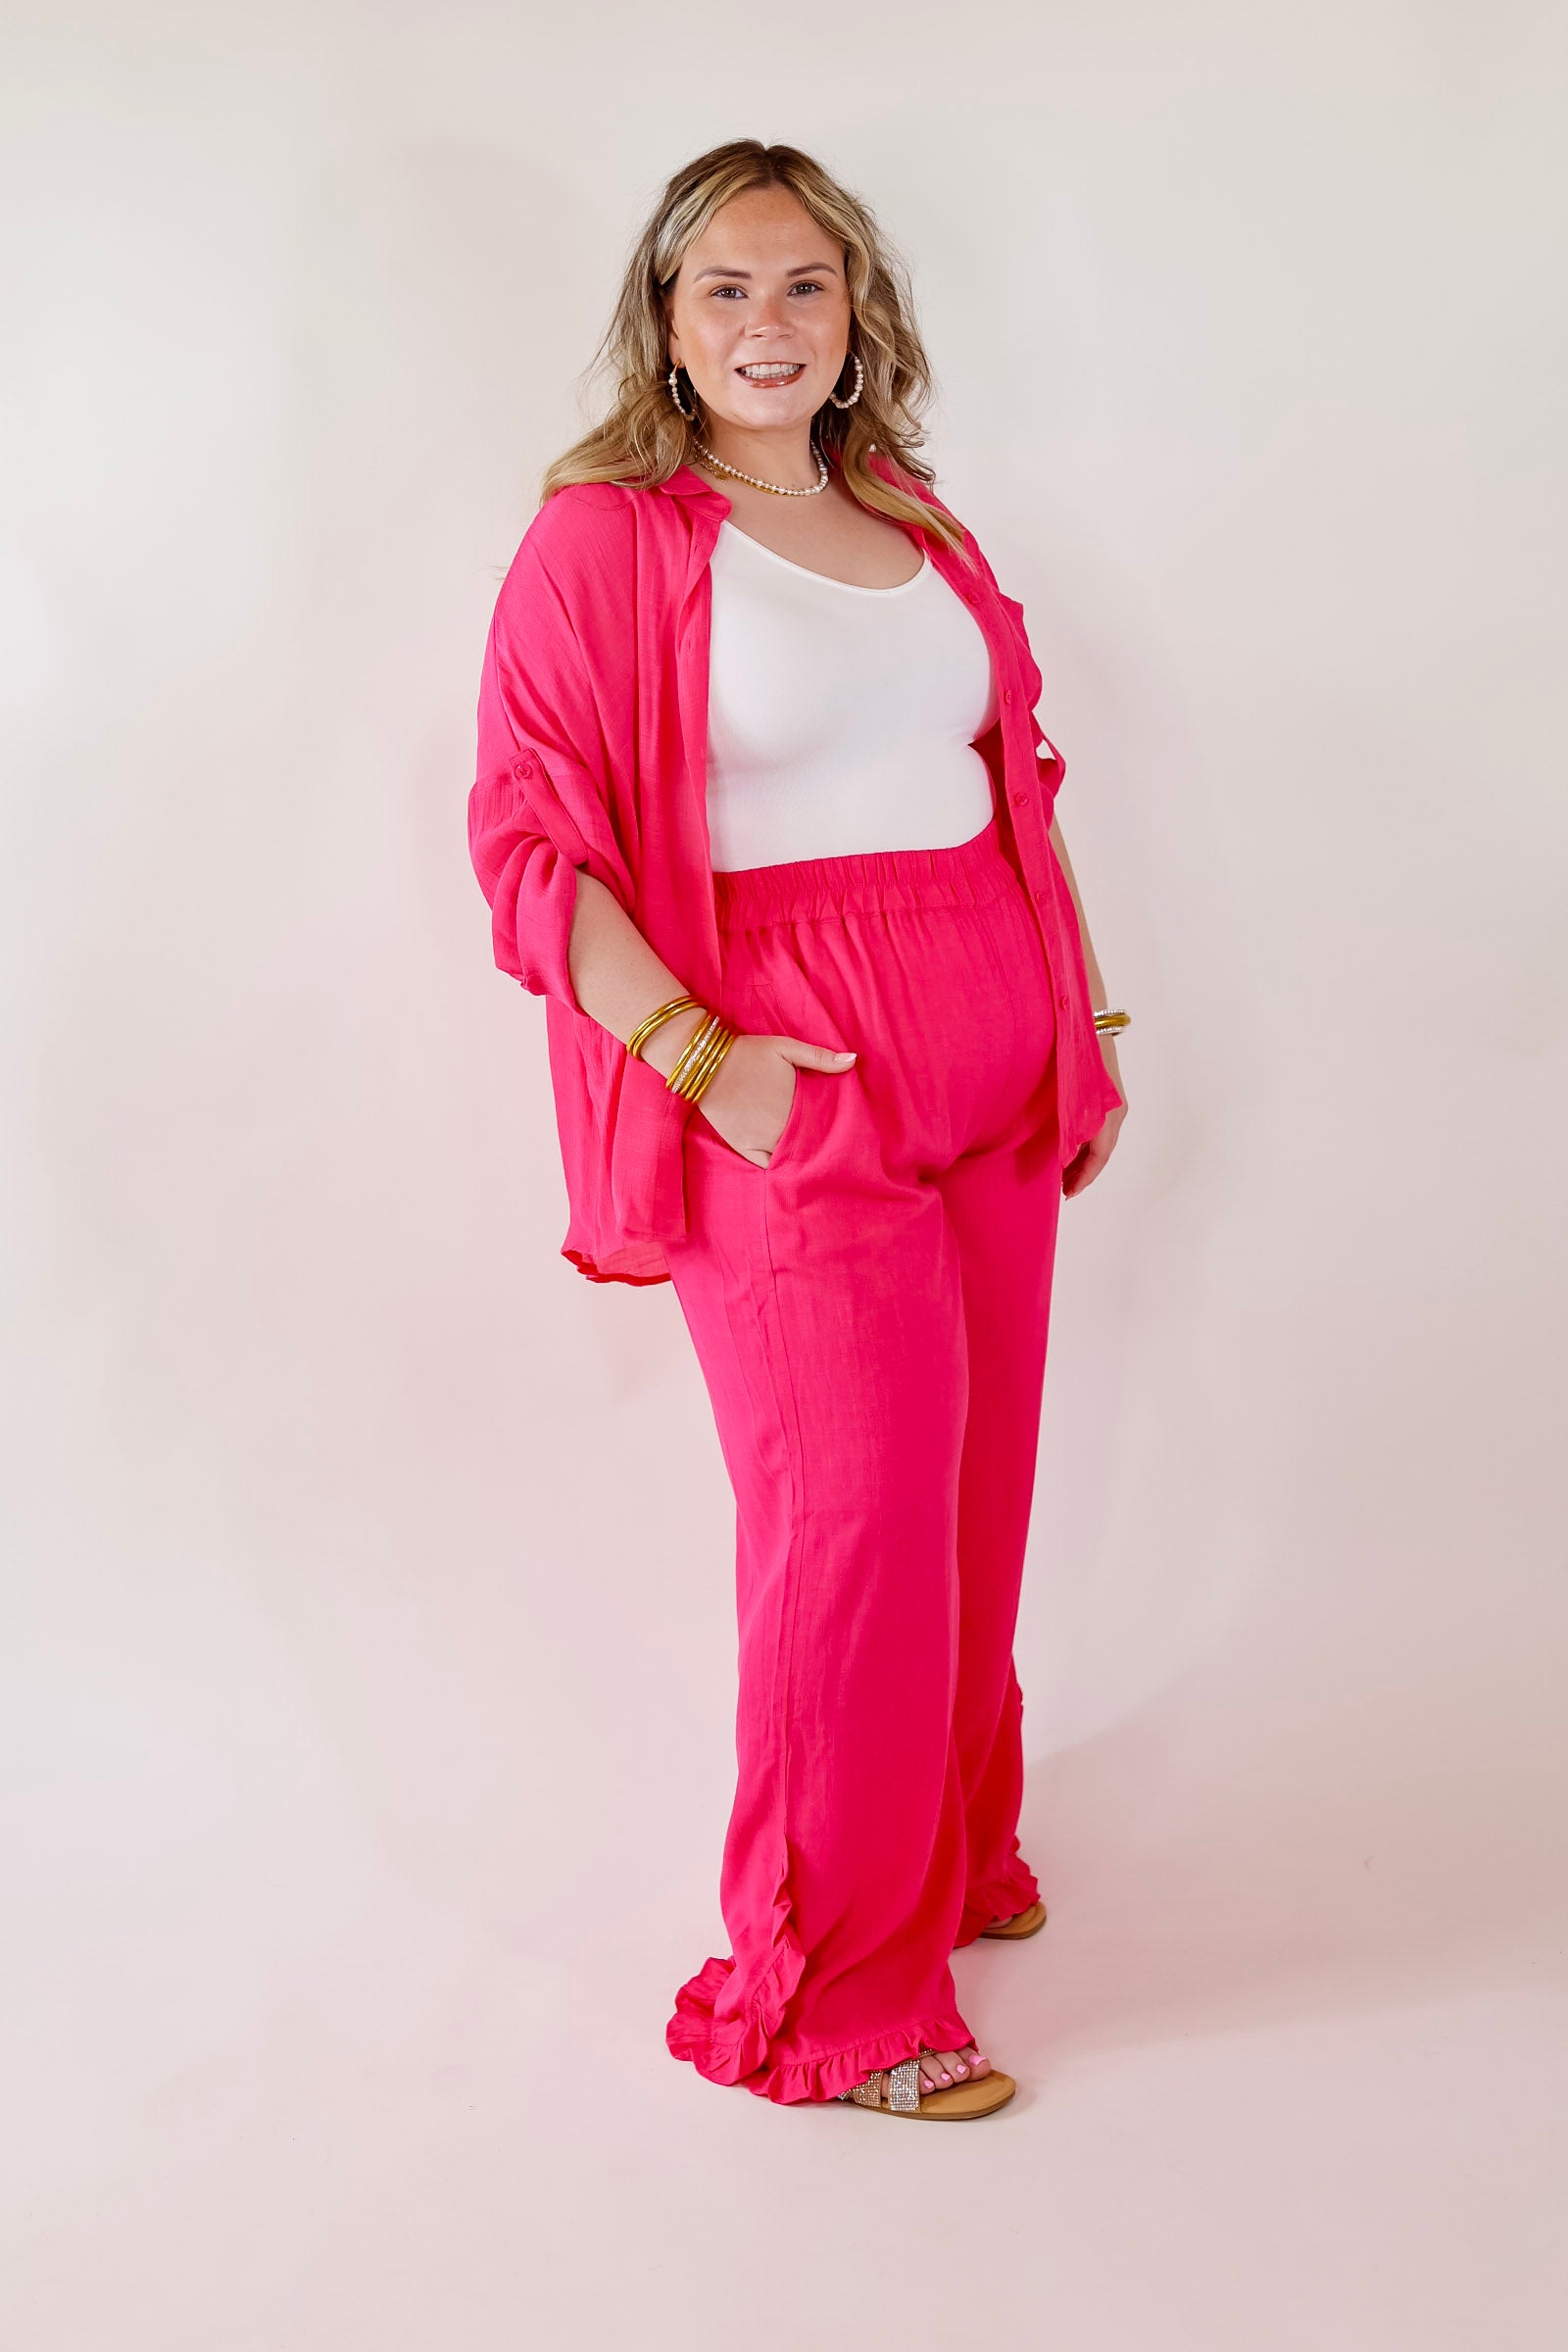 My Spotlight Ruffled Hem Linen Pants in Hot Pink - Giddy Up Glamour Boutique